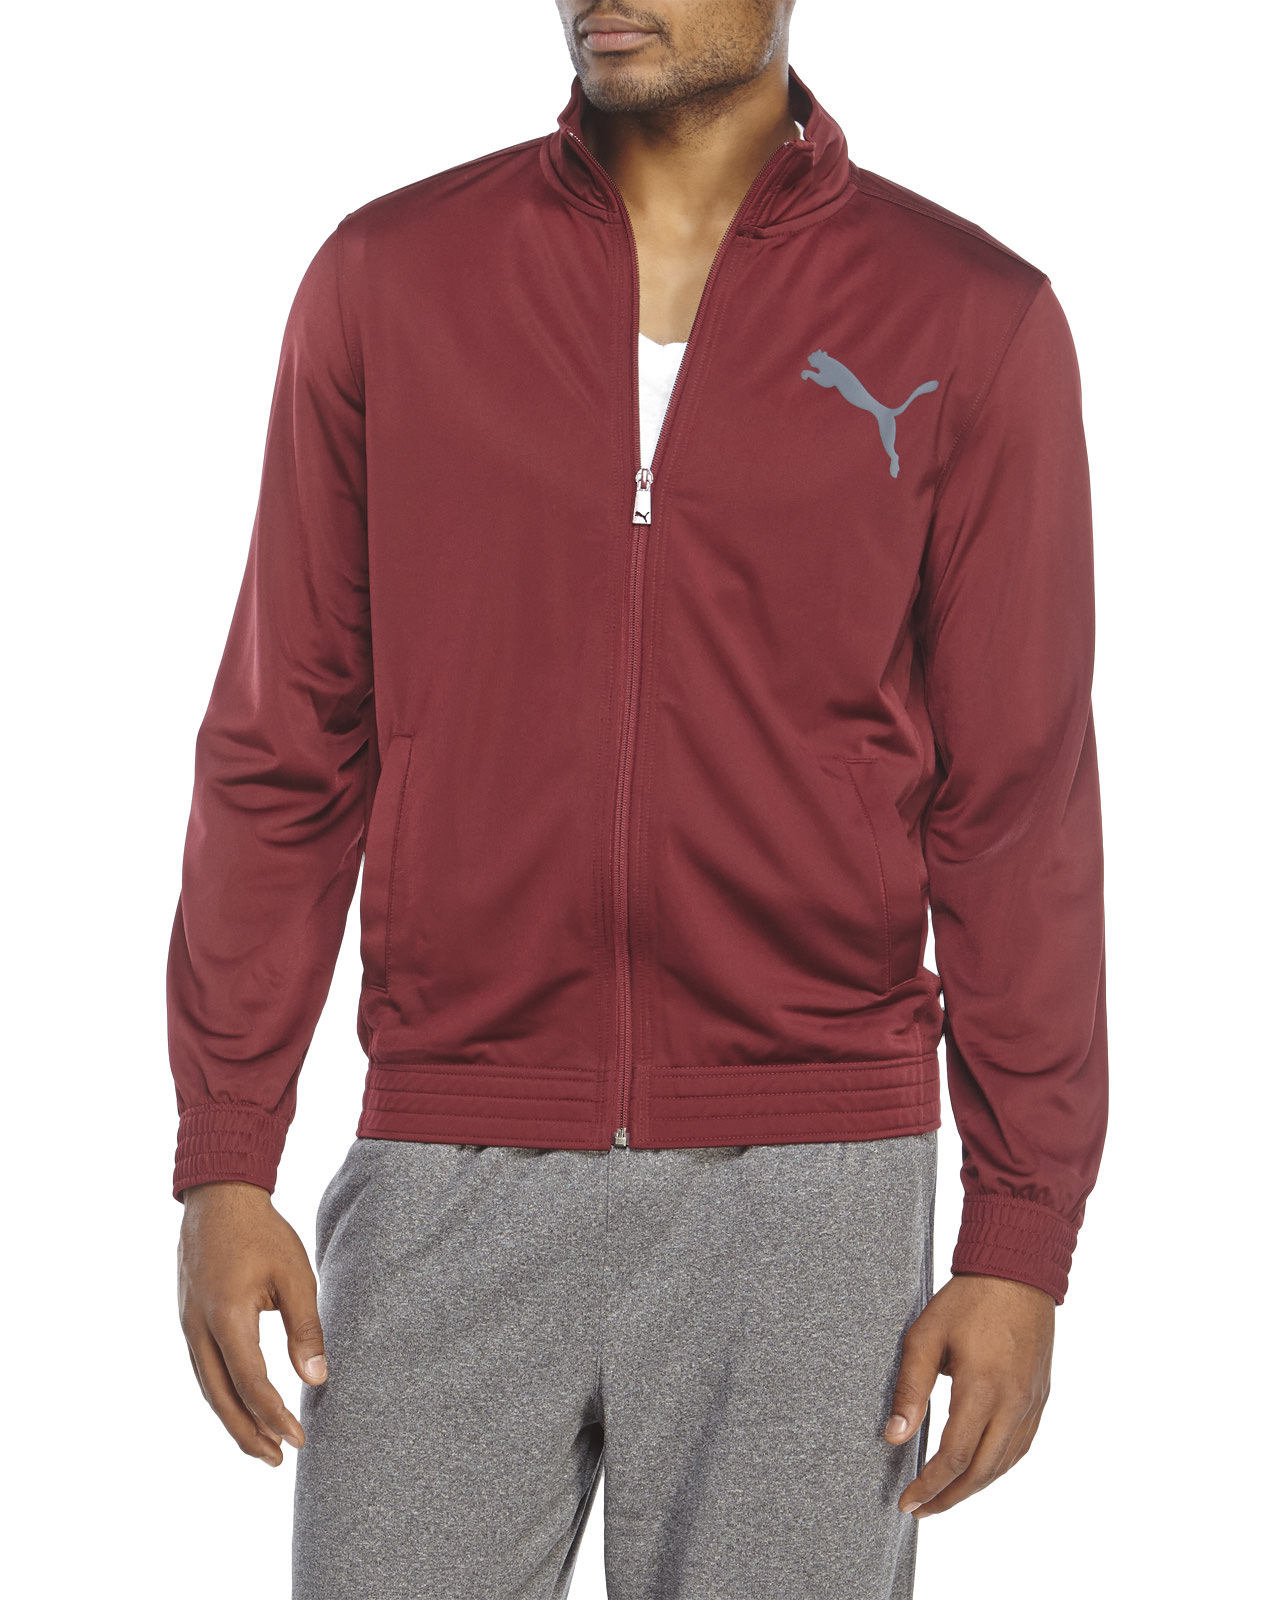 Lyst - Puma Contrast Jacket in Red for Men